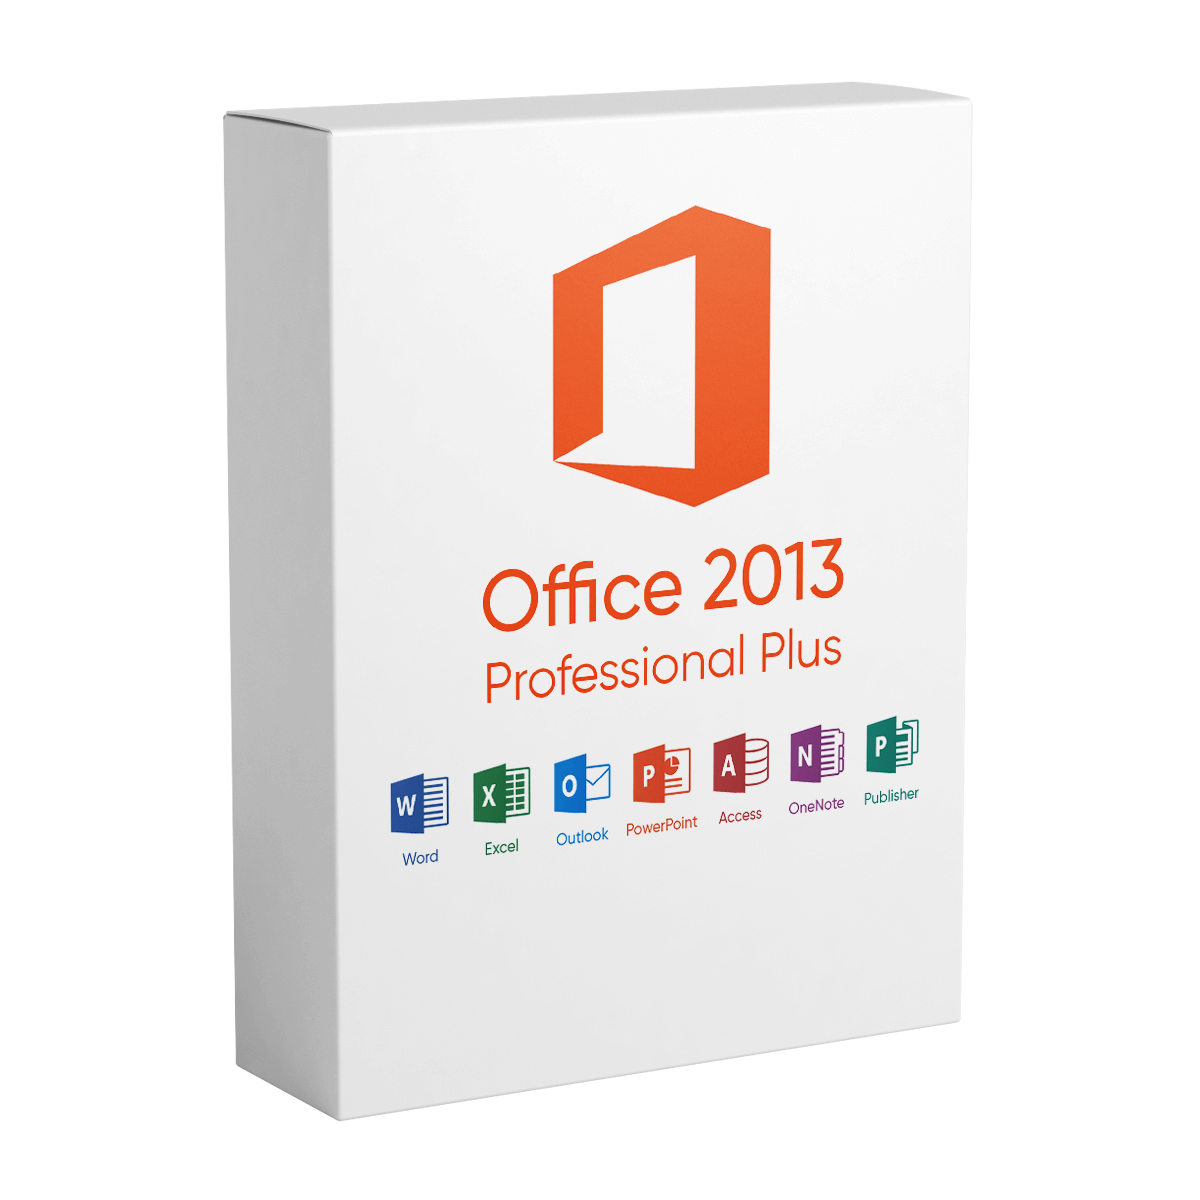 Office 2013 Professional Plus - Lifetime License for 1 PC